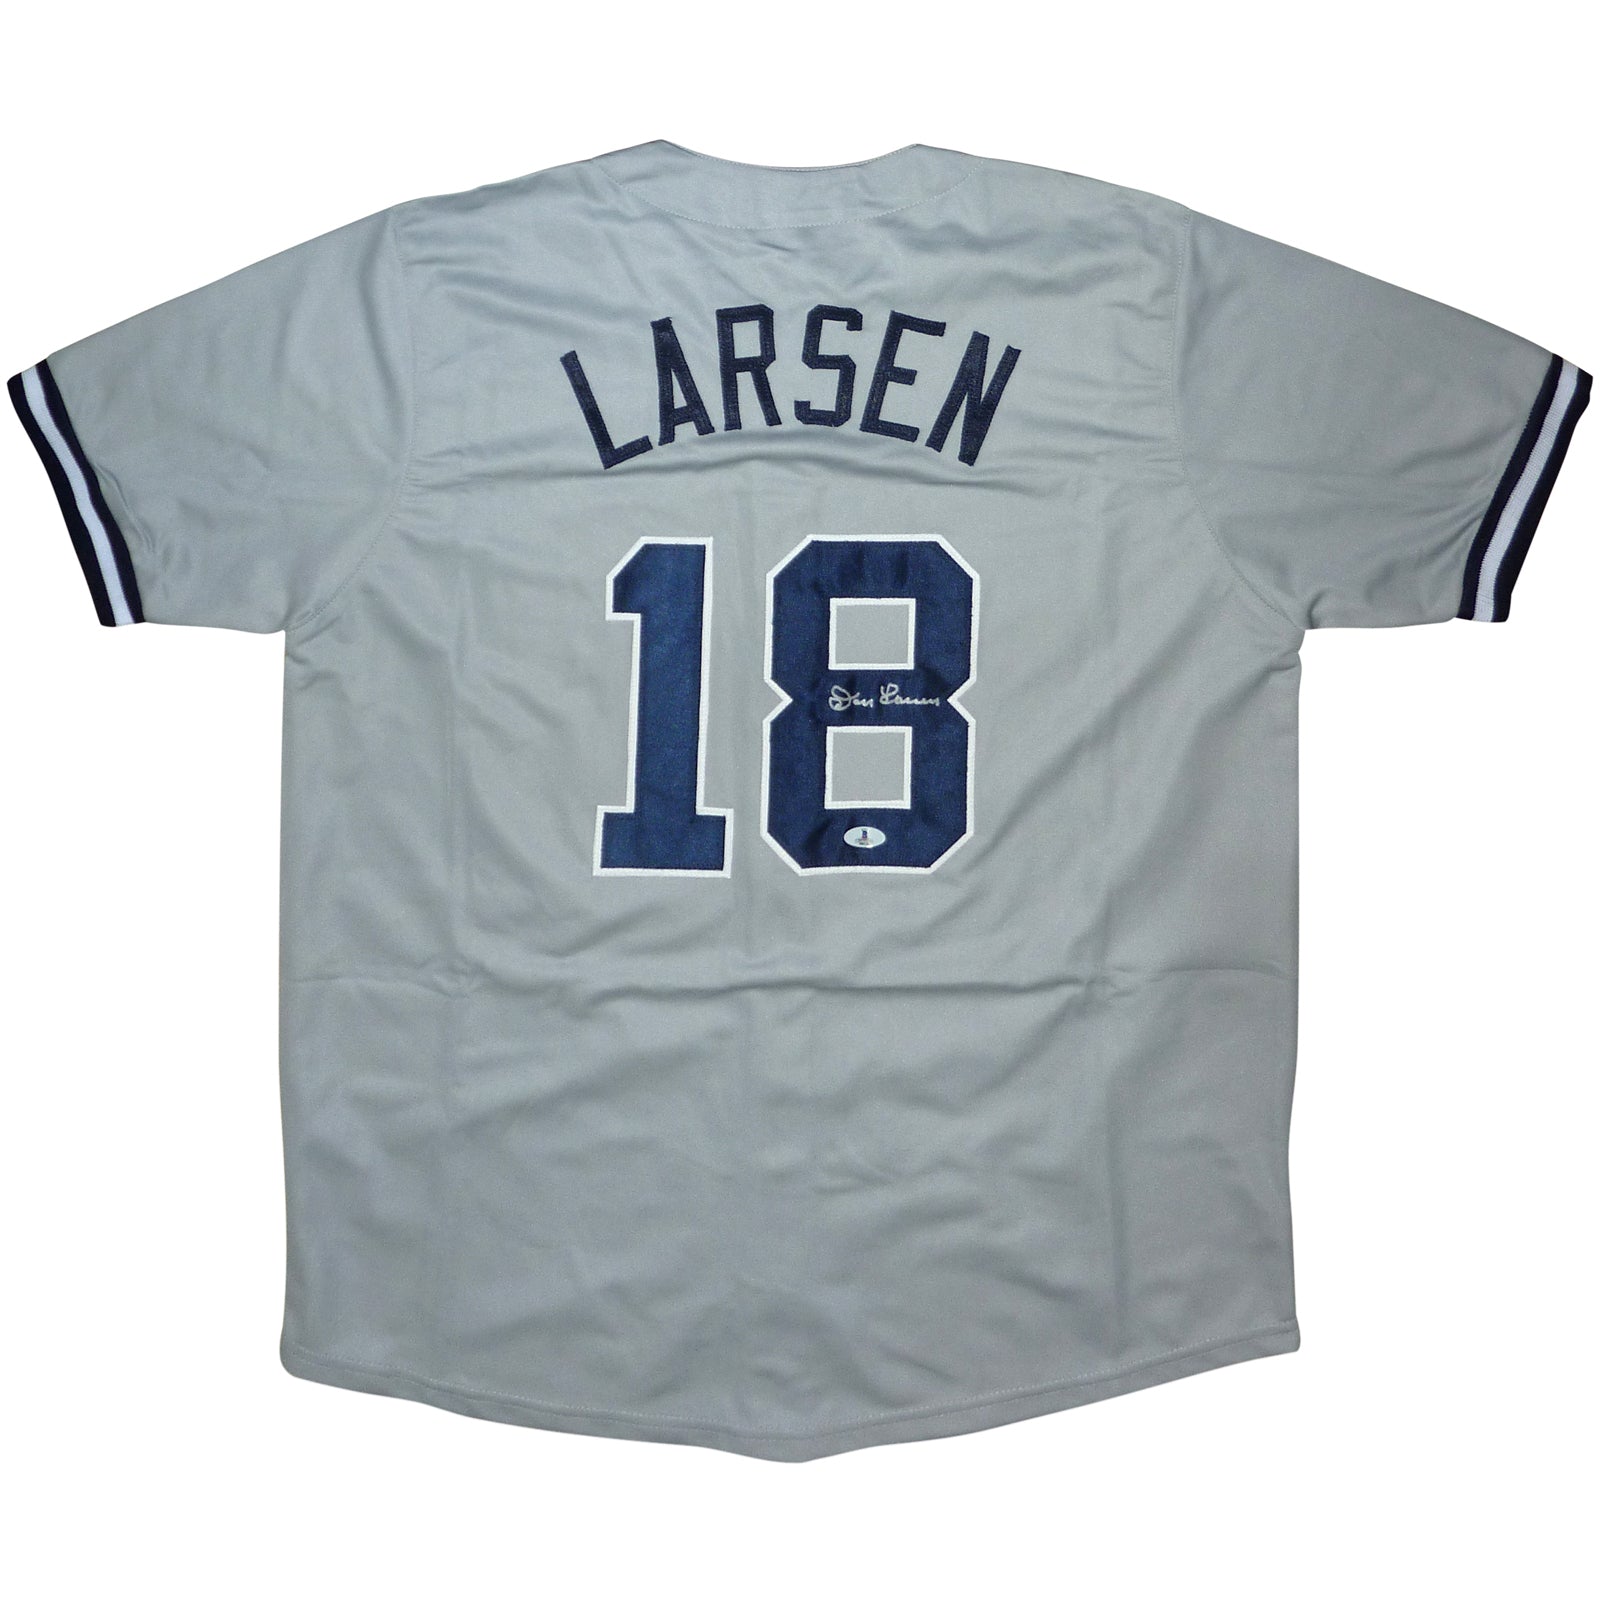 Free Texas Rangers Authentic Personalized Jersey White Gray Blue